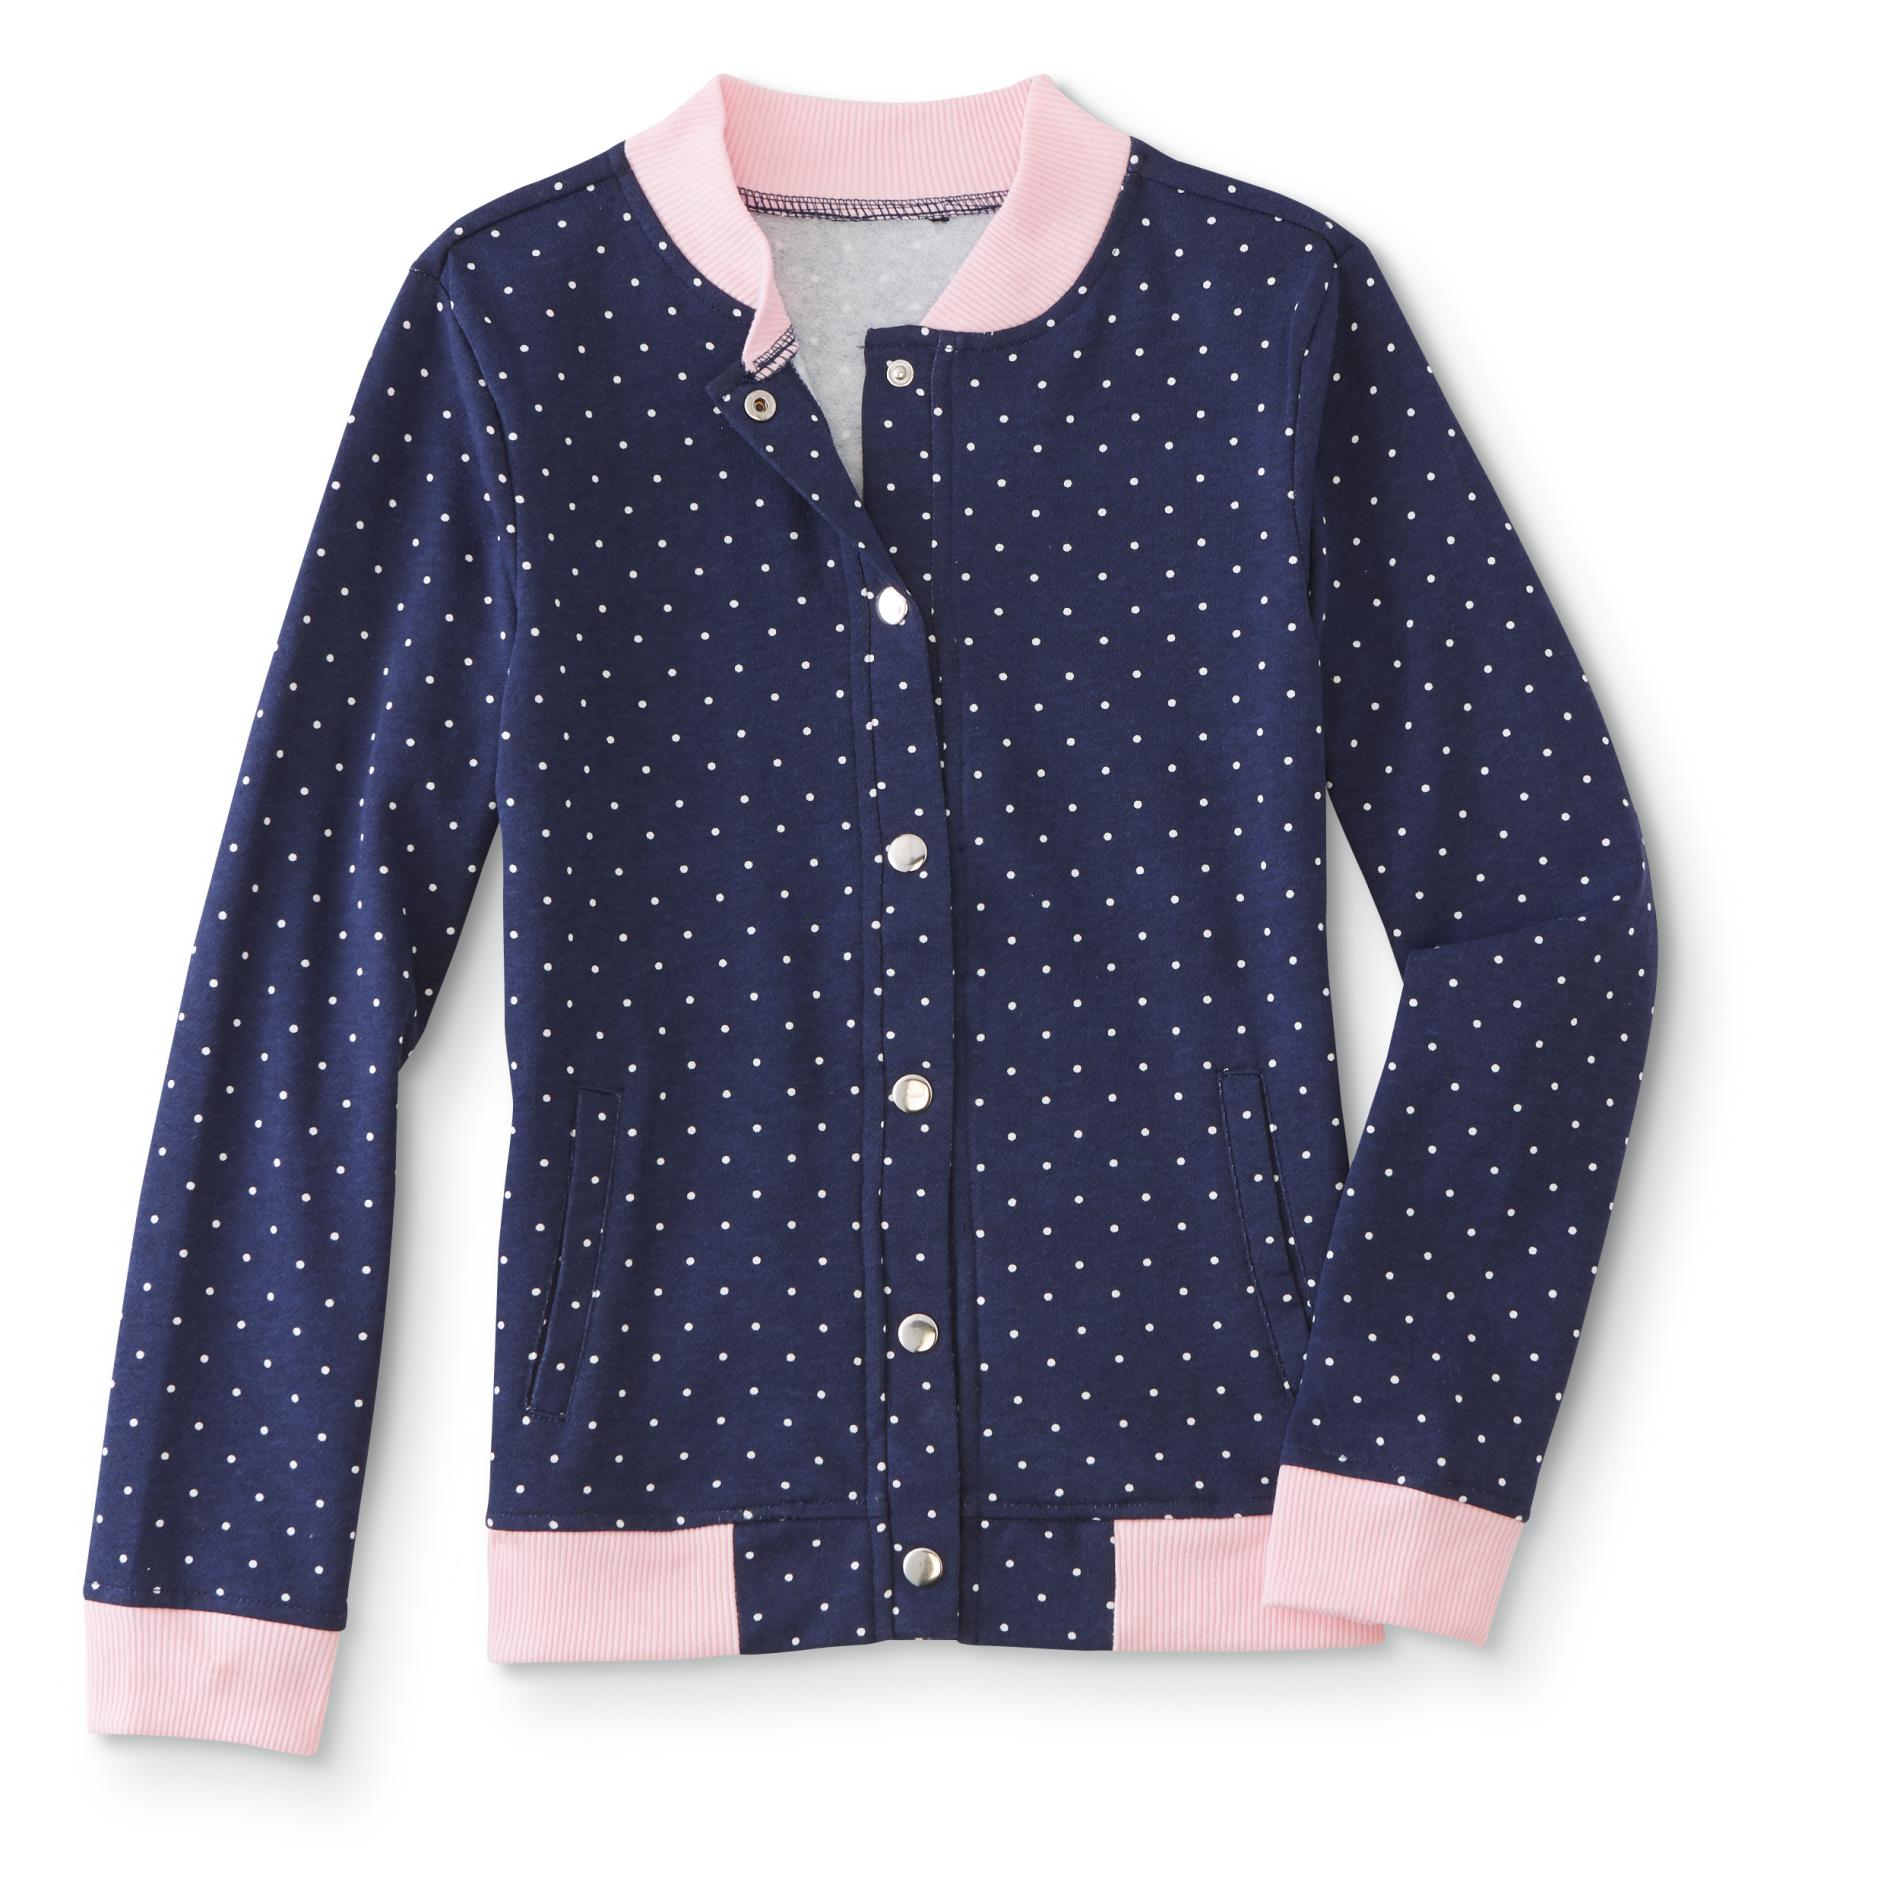 Simply Styled Girls' Bomber Jacket - Dots